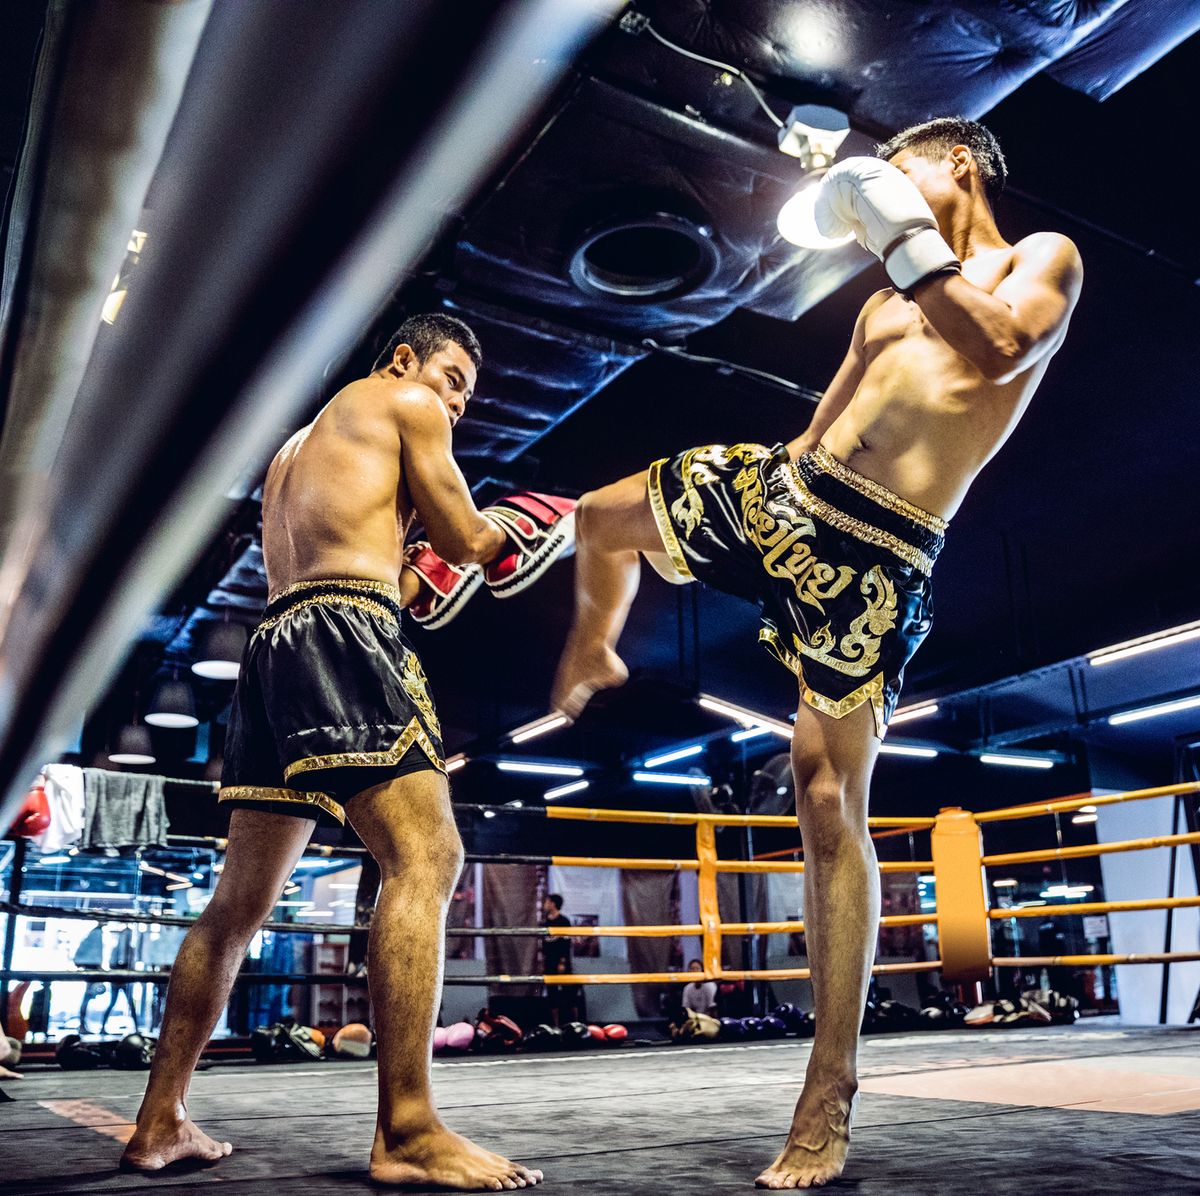 This Guy Trained Muay Thai for 30 Days and Tried to Win a Fight